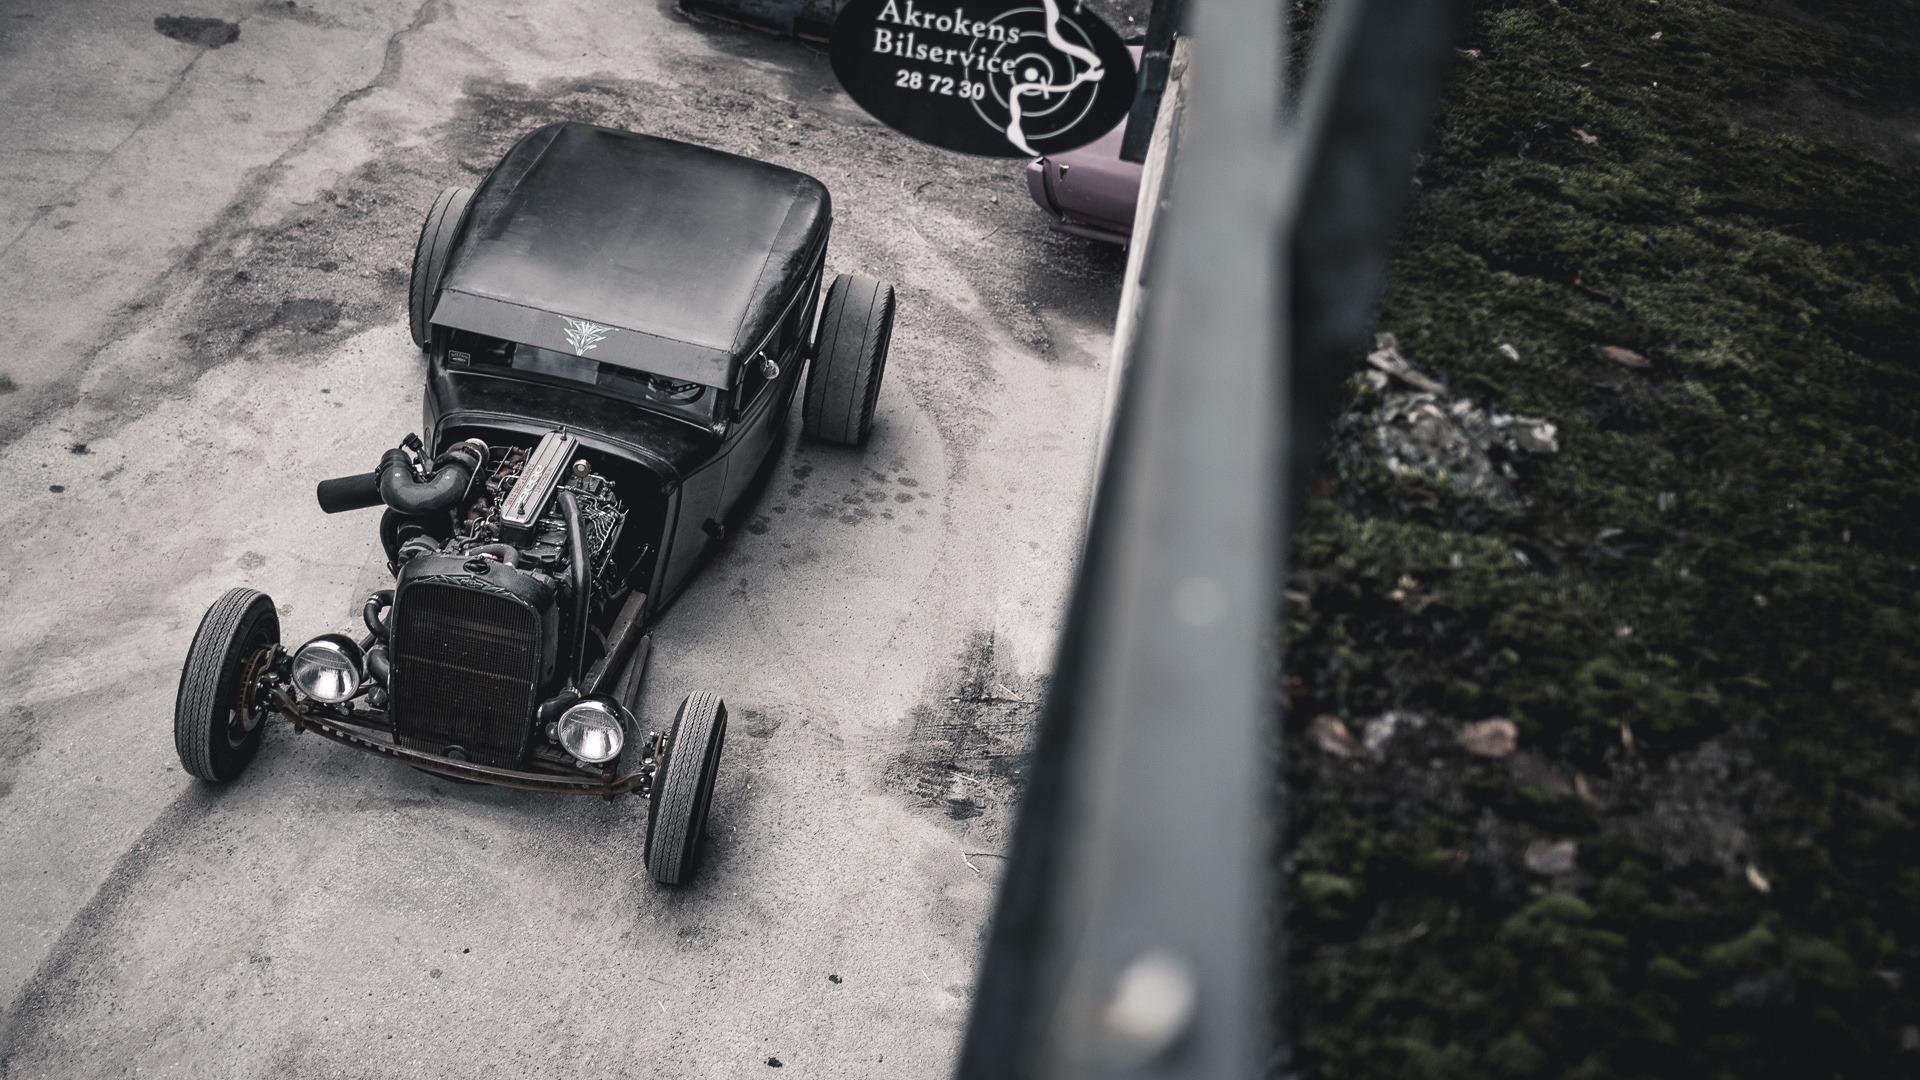 Download Classic Rat Rod Wallpapers Free for Android - Classic Rat Rod  Wallpapers APK Download - STEPrimo.com